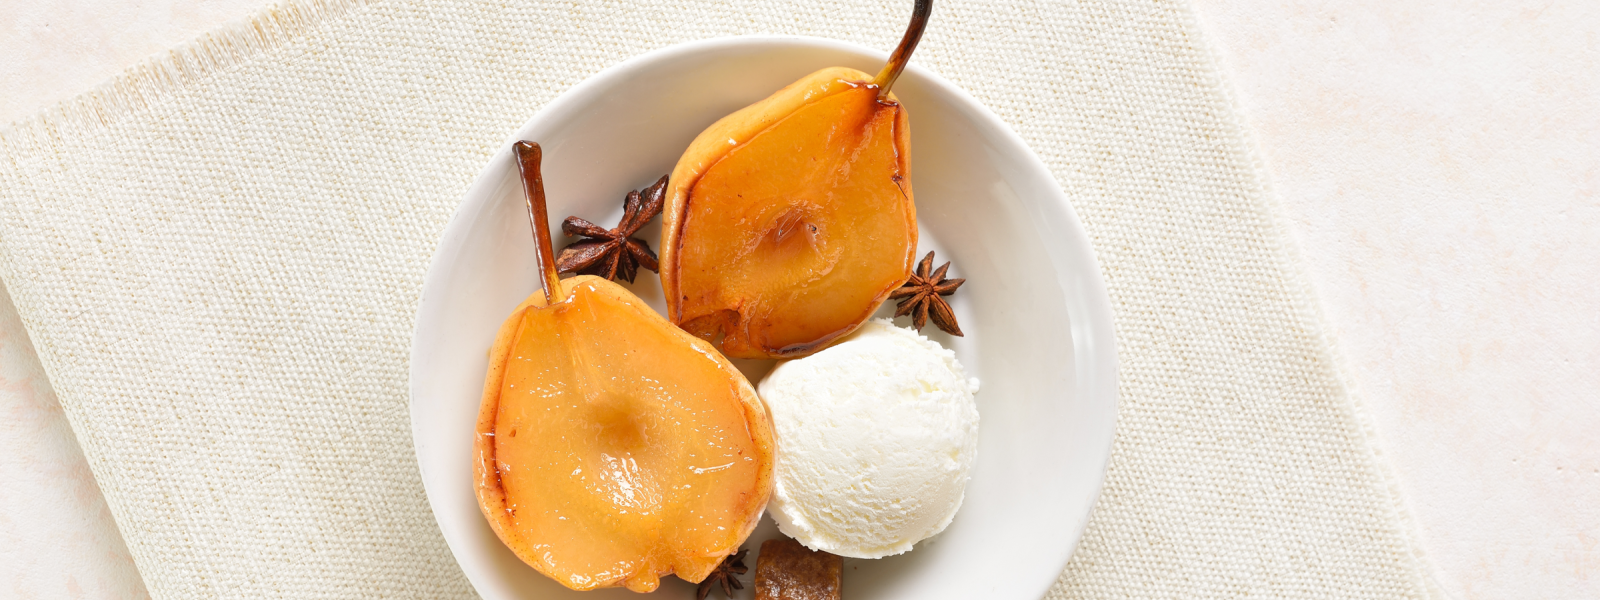 Image of poached pears with ice cream.